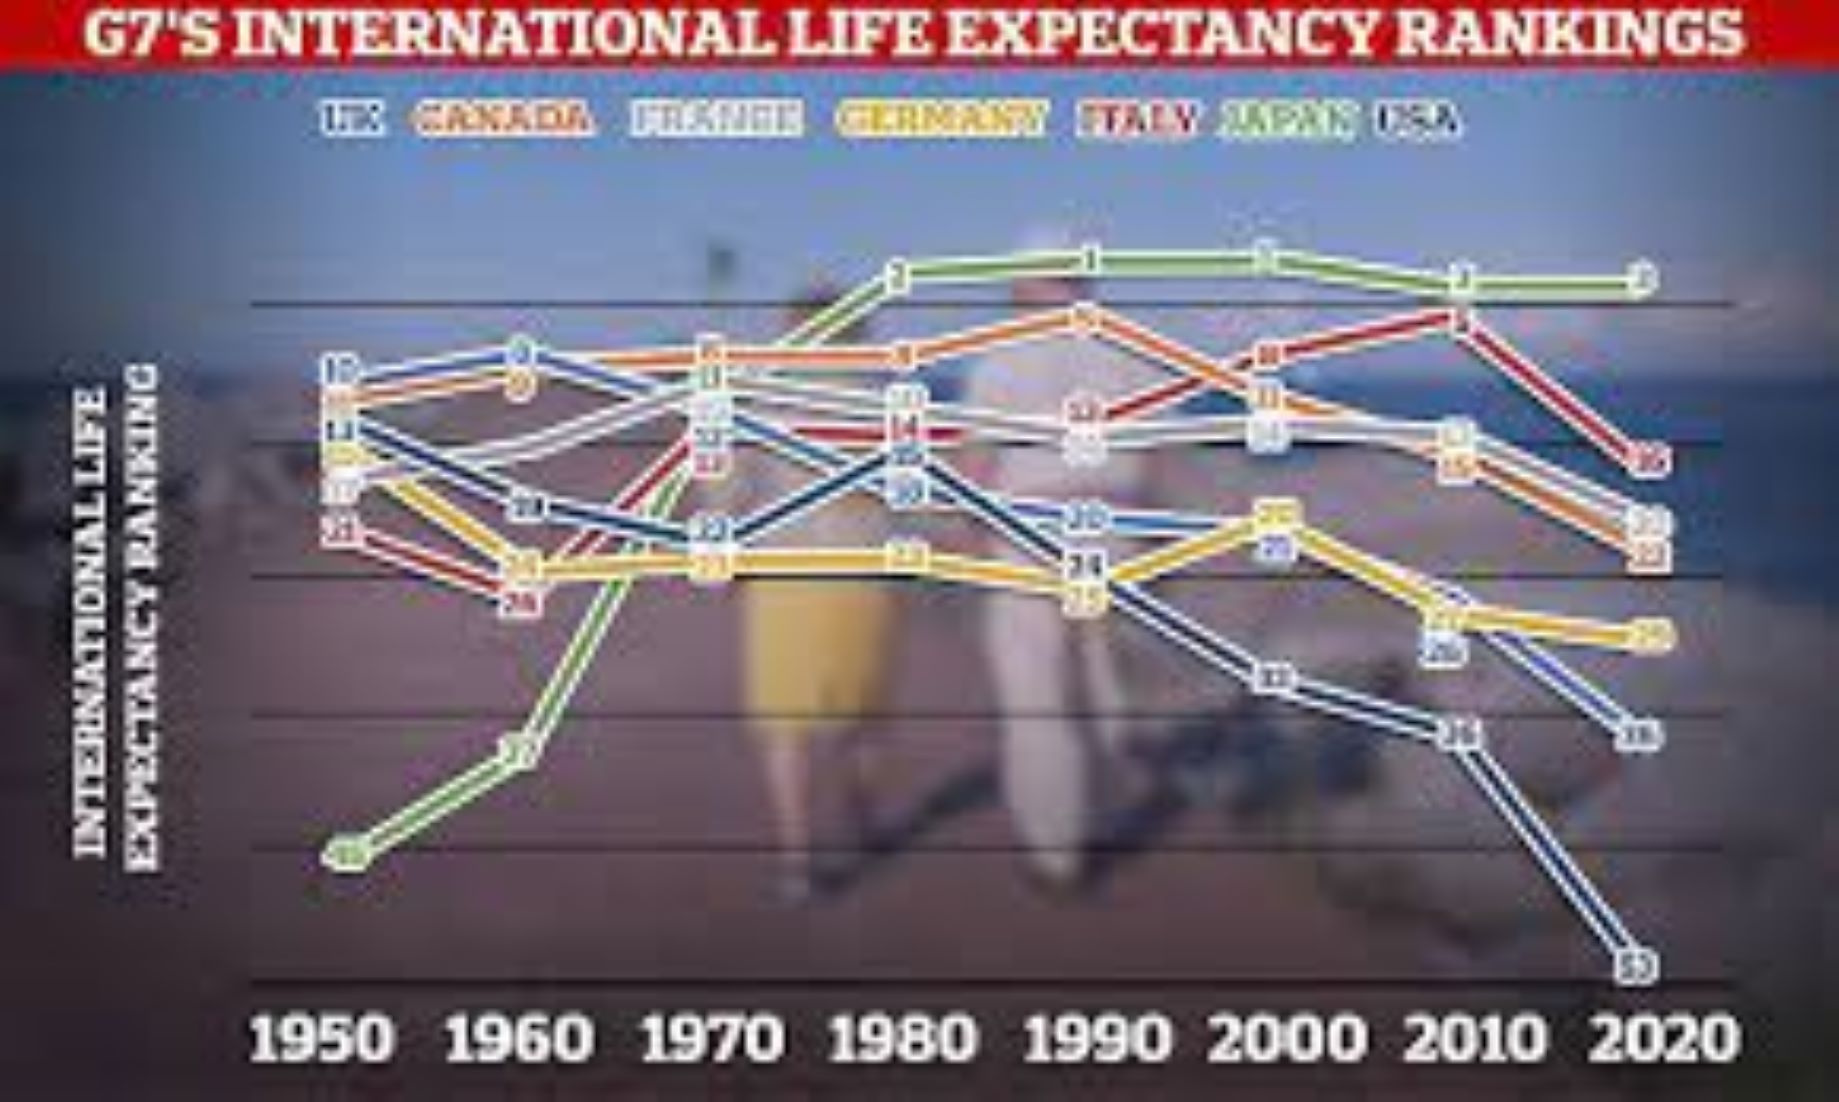 U.S. Has Lowest Life Expectancy Of All G7 Nations: Daily Mail